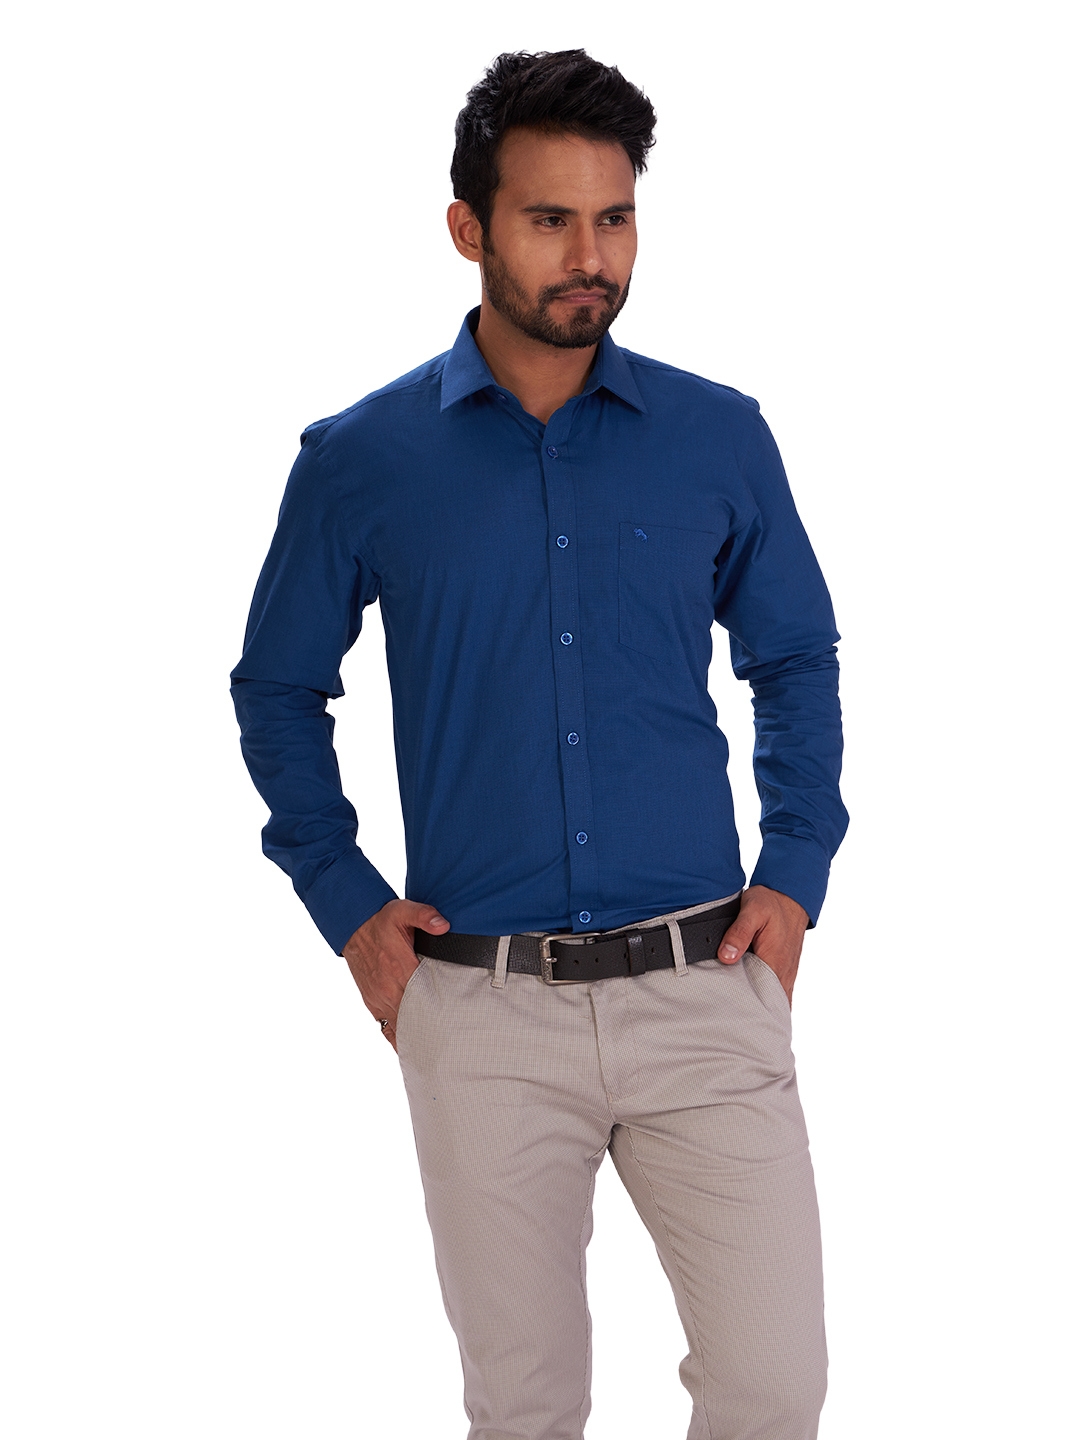 D'cot by Donear | D'cot by Donear Men's Navy Blue Cotton Formal Shirts 0